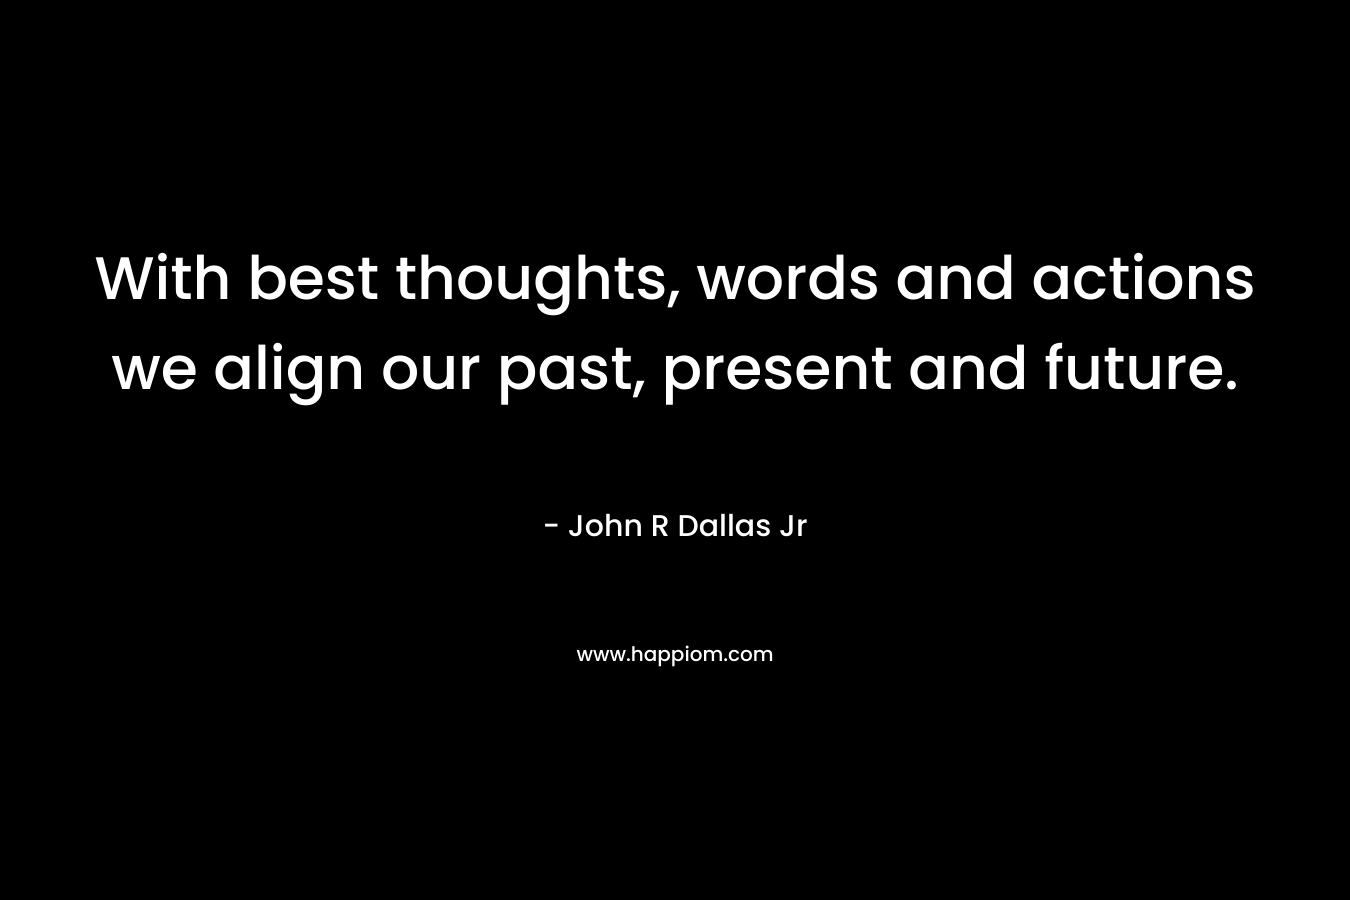 With best thoughts, words and actions we align our past, present and future. – John R Dallas Jr